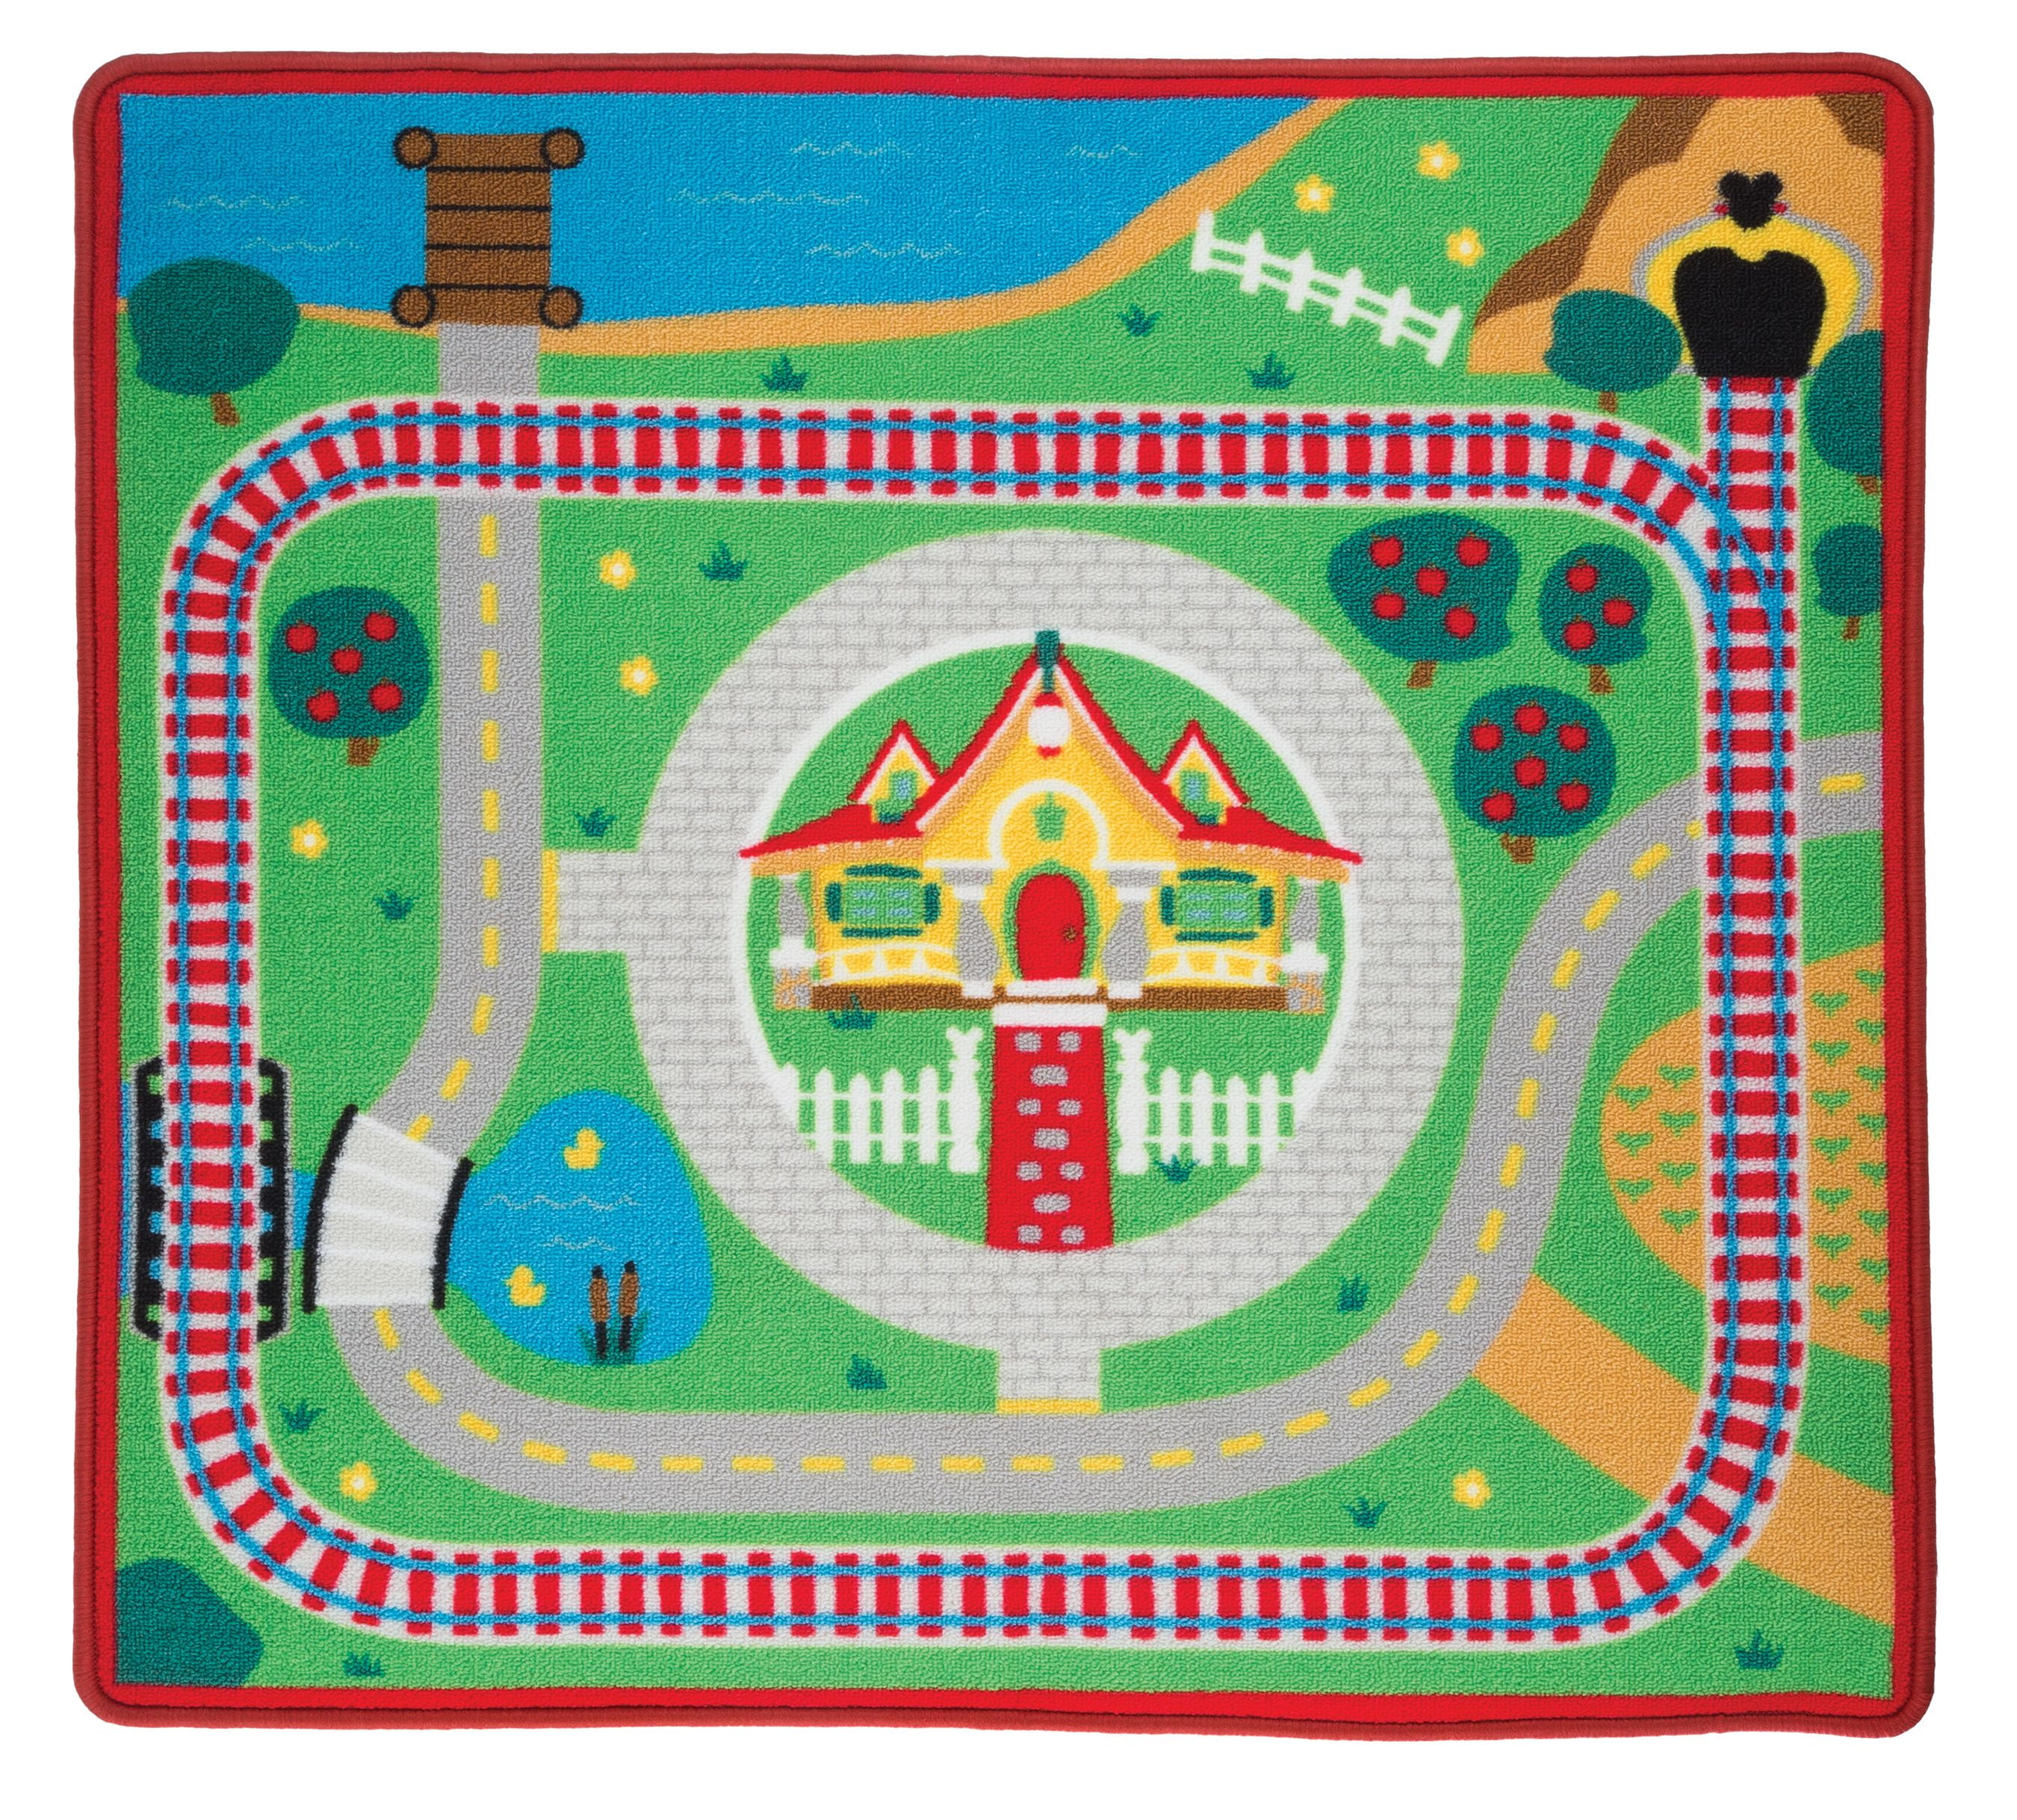 Gertmenian Disney Mickey Mouse Clubhouse Toys Rug Play Mat Game Rugs w/Mickey Toy Car and Pluto 32x44 